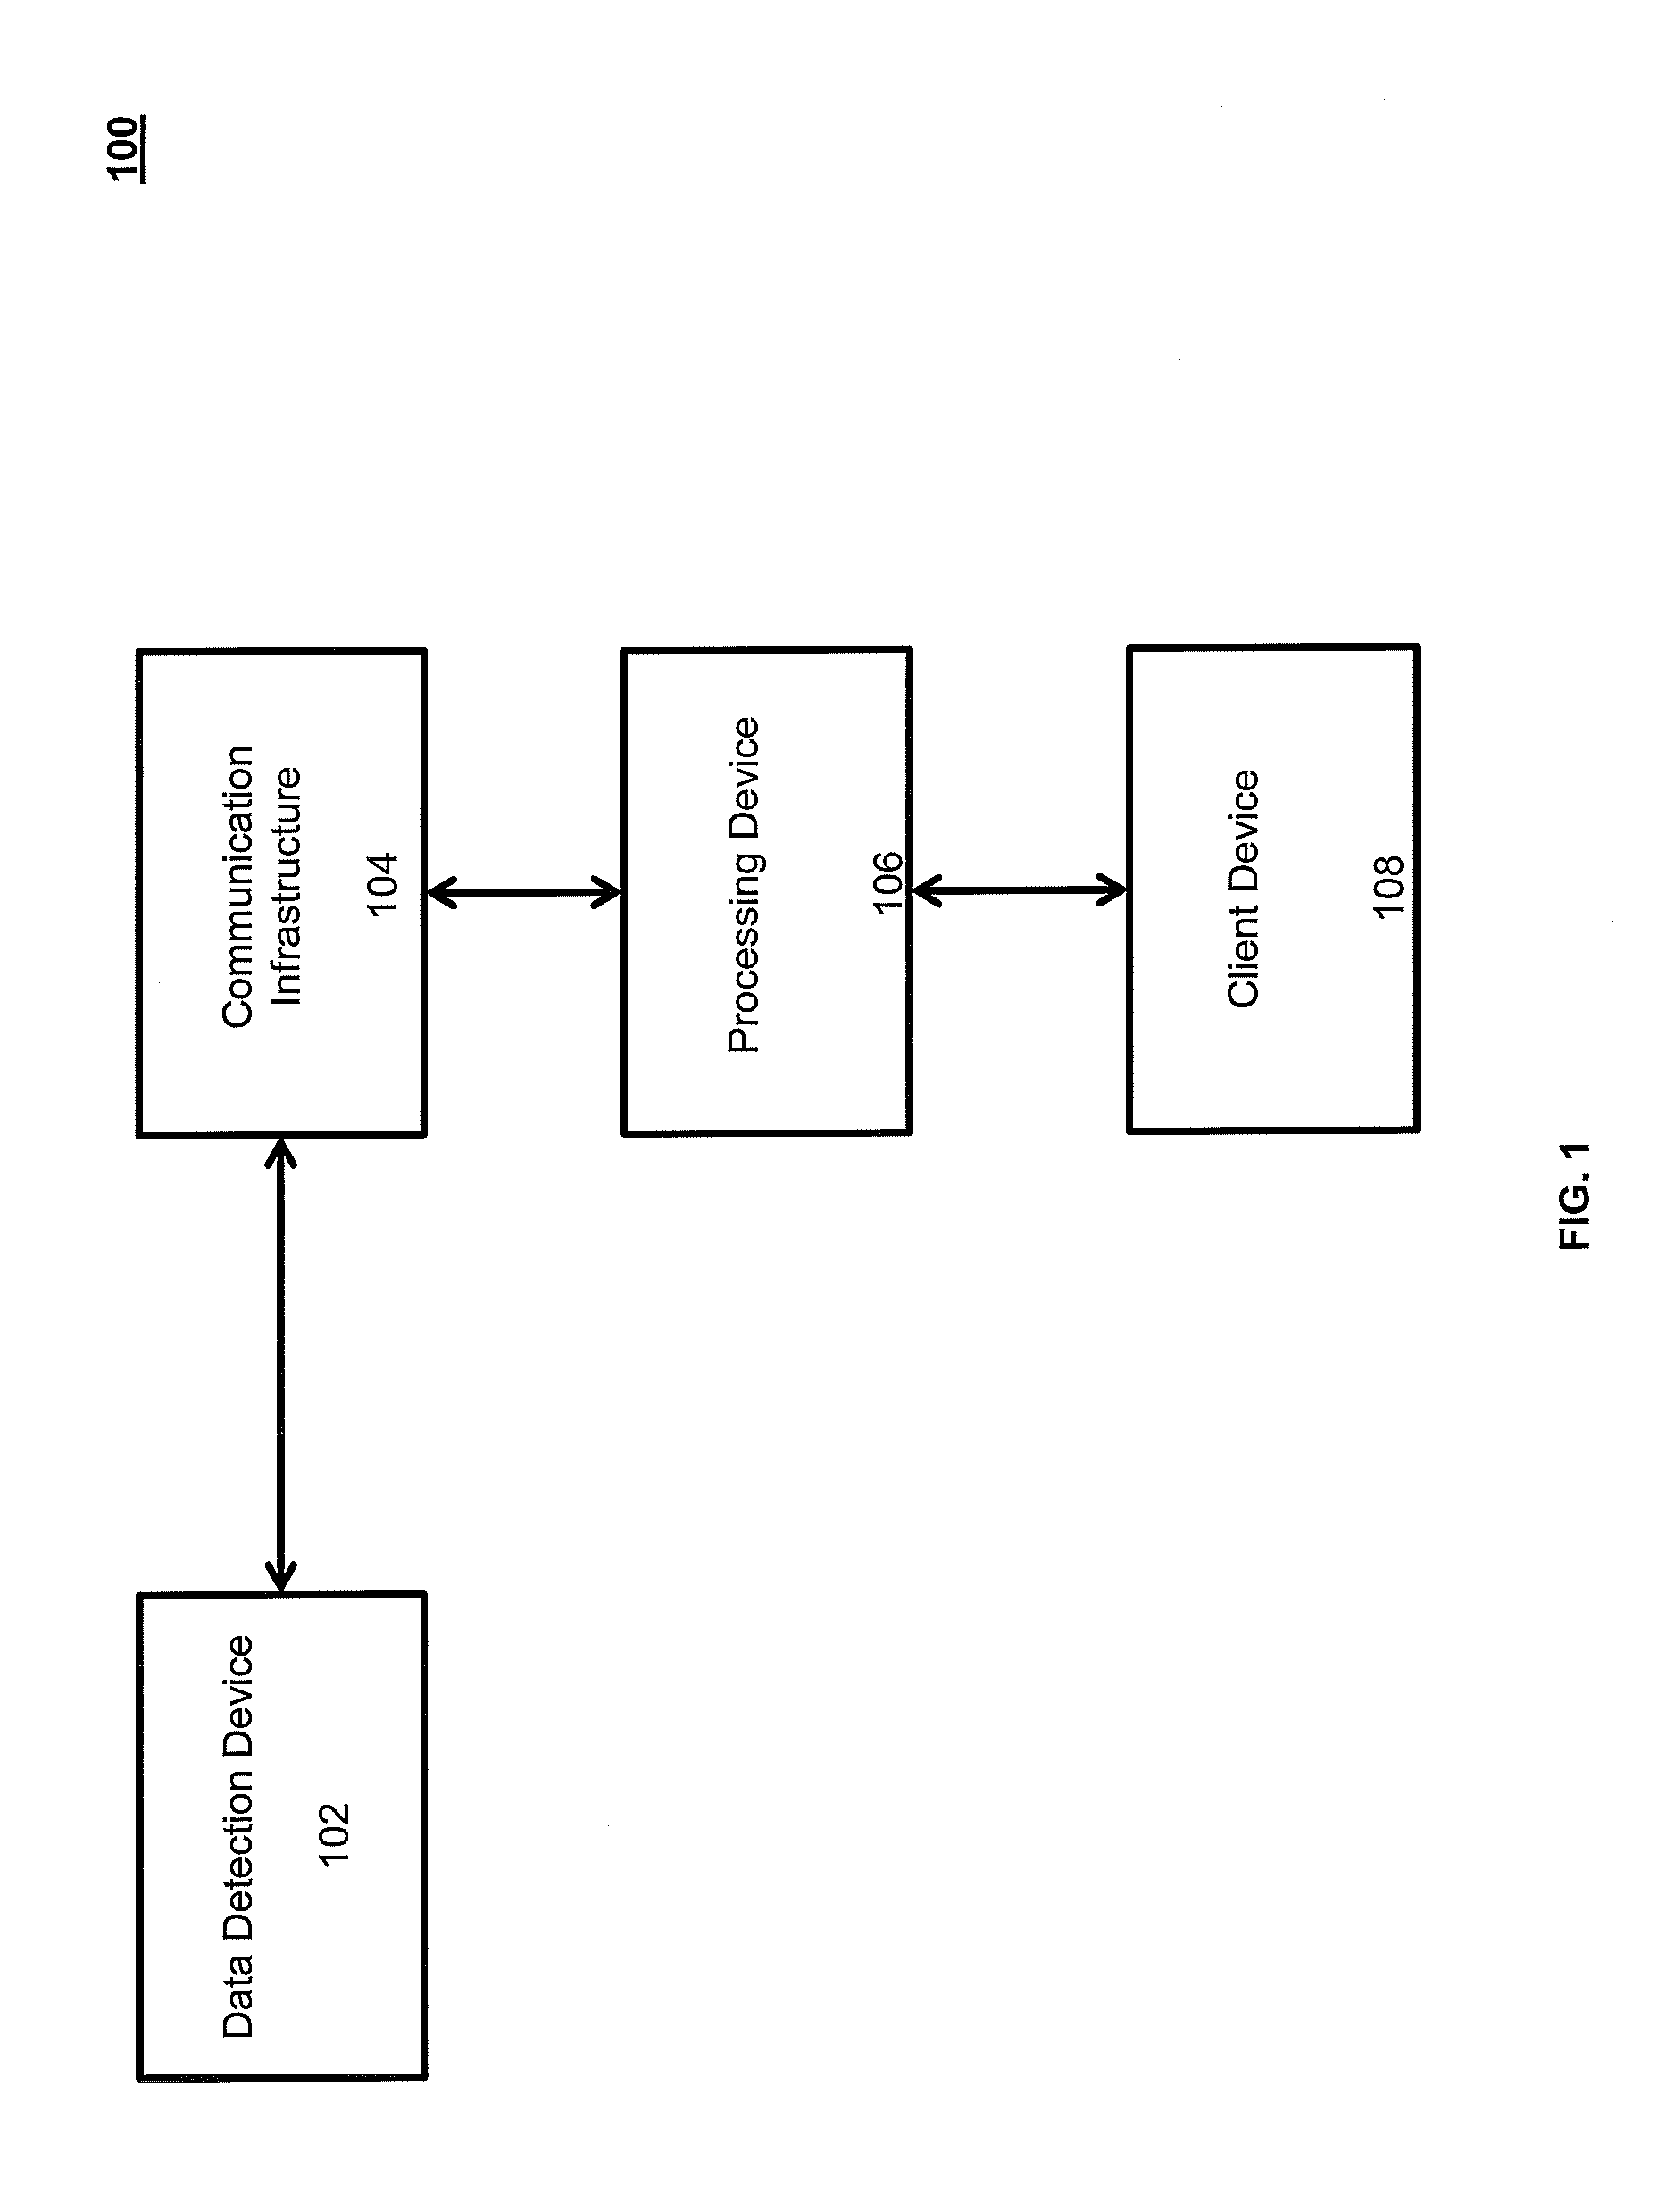 System and methods for remote monitoring